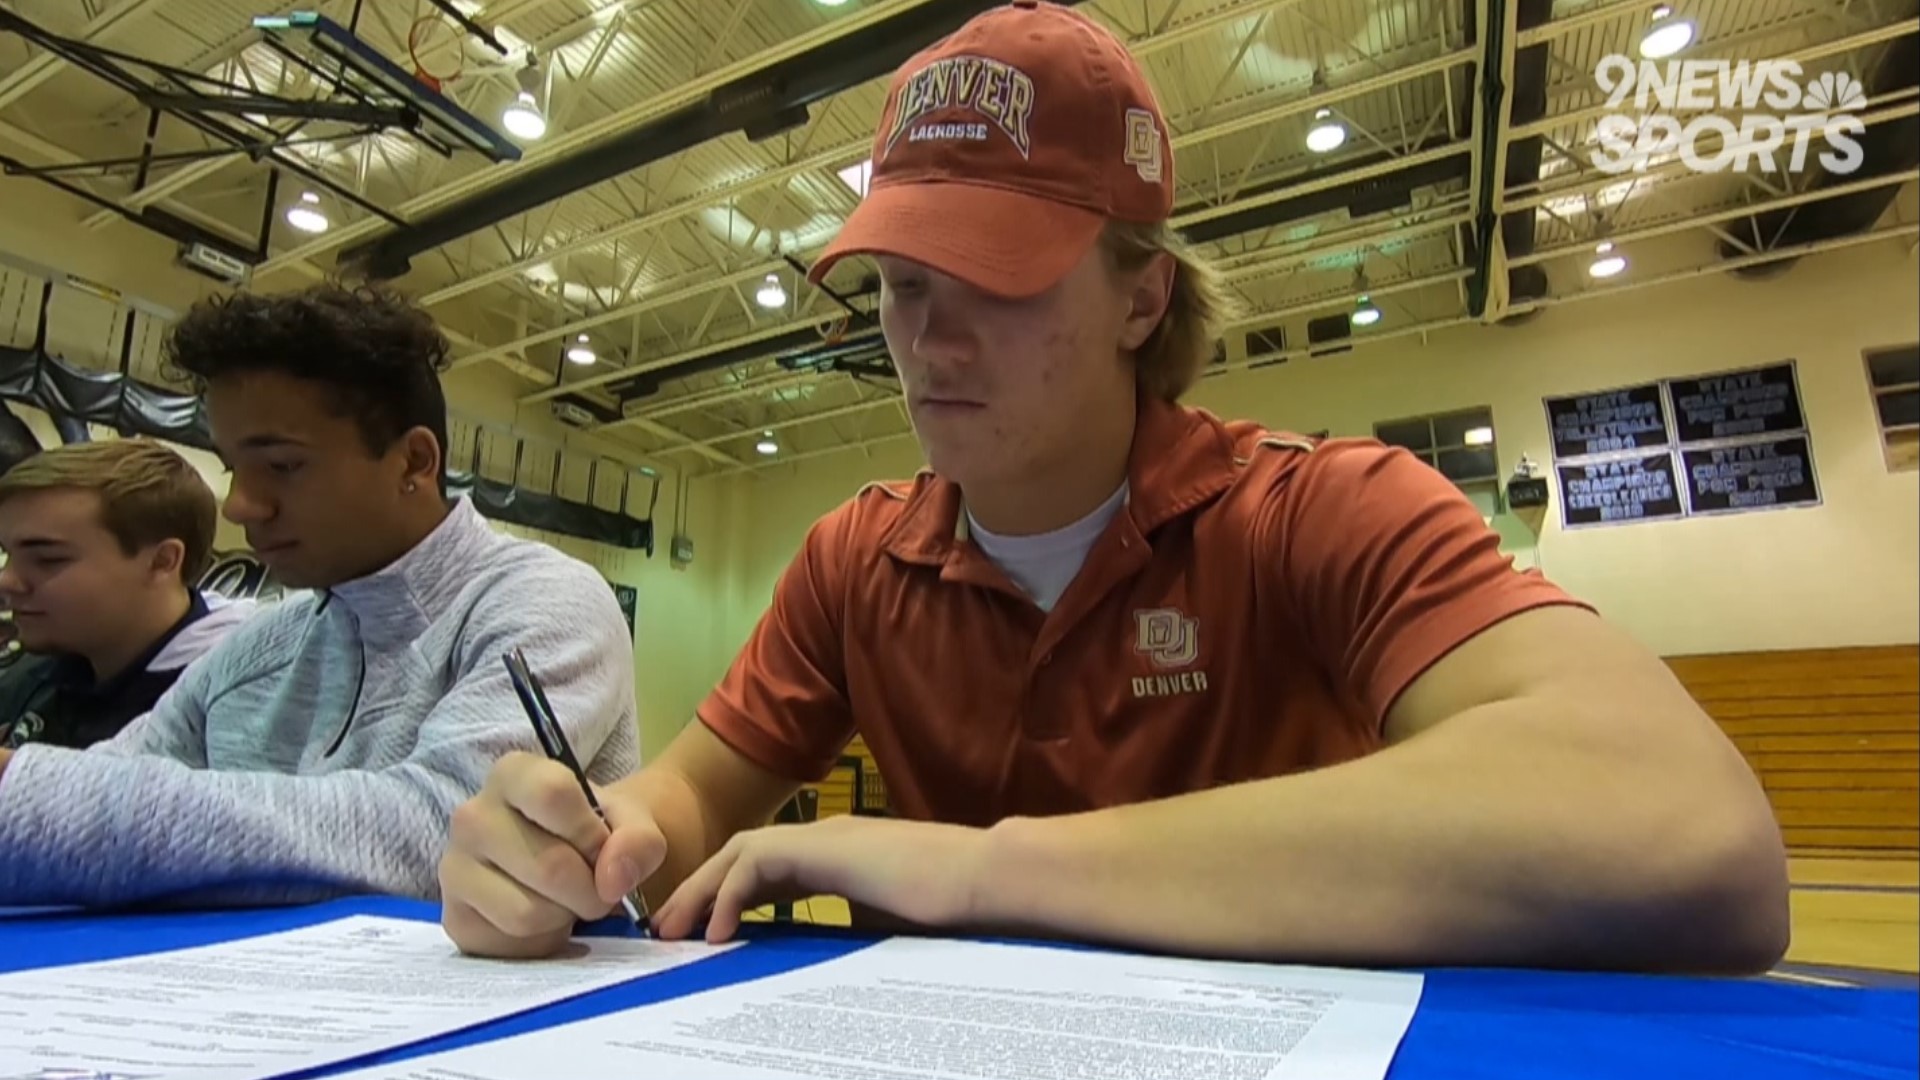 Local highlights from 2019-20 National Signing Day.